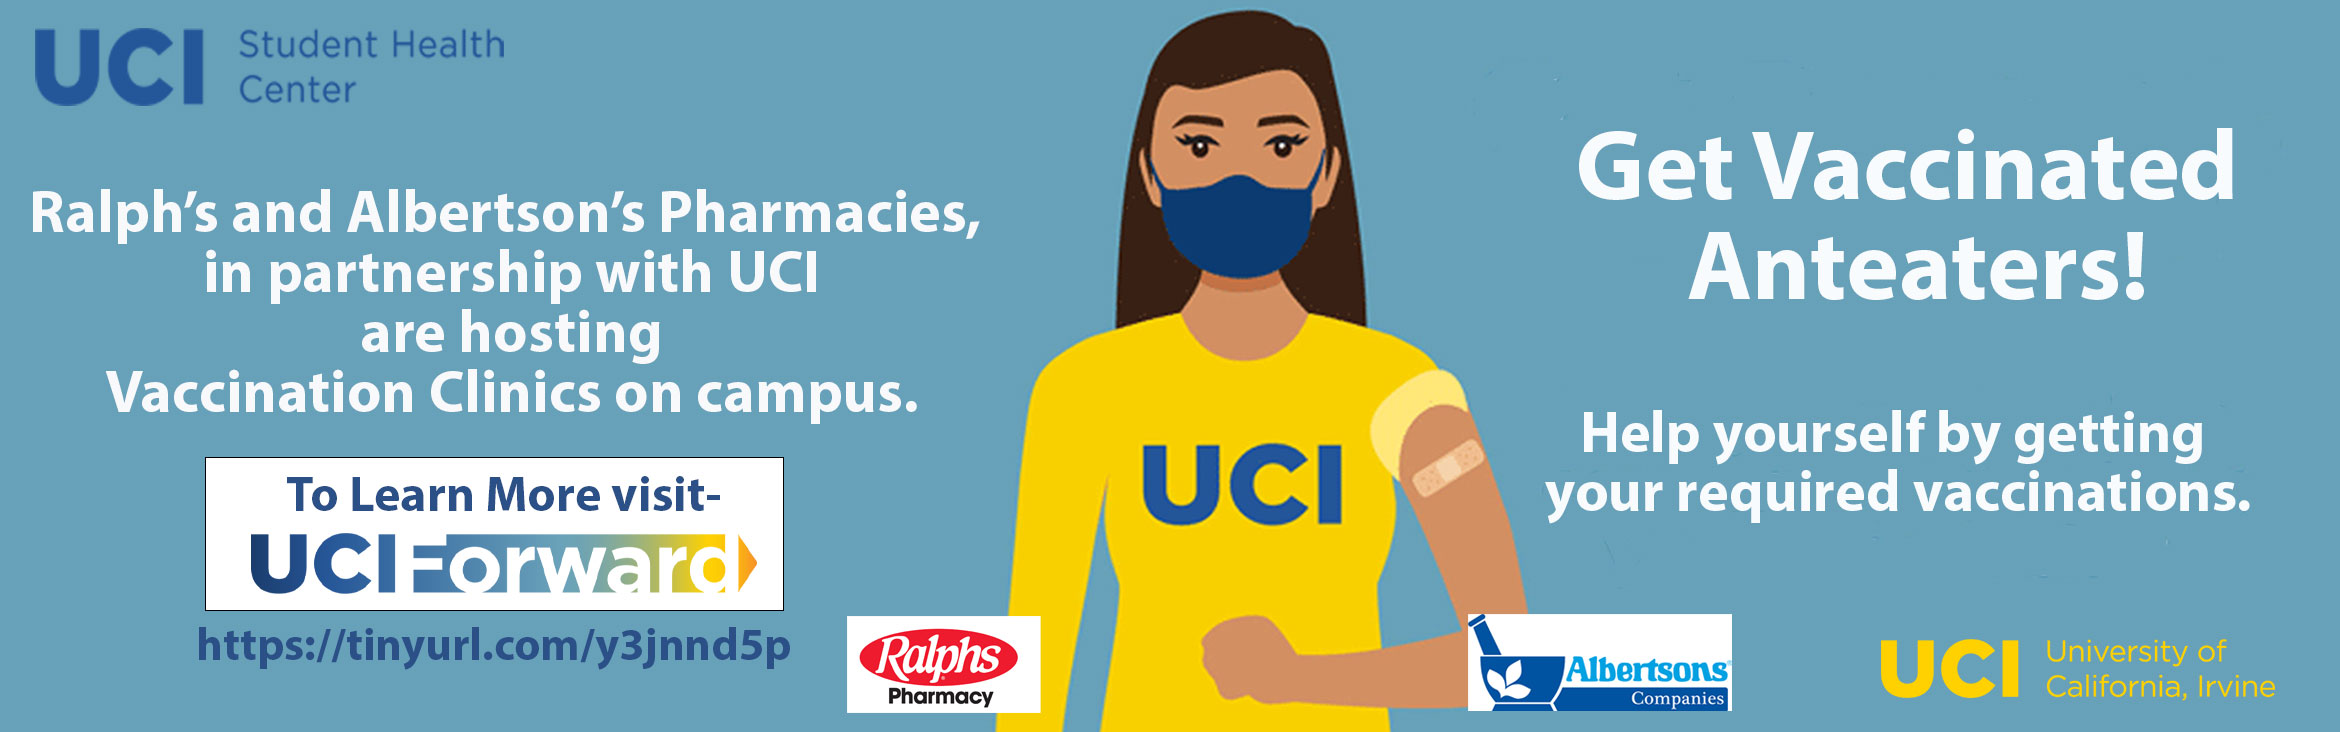 Ralph's and Albertson's Pharmacies, in Partnership with UCI, are hosting Vaccination Clinics on campus.